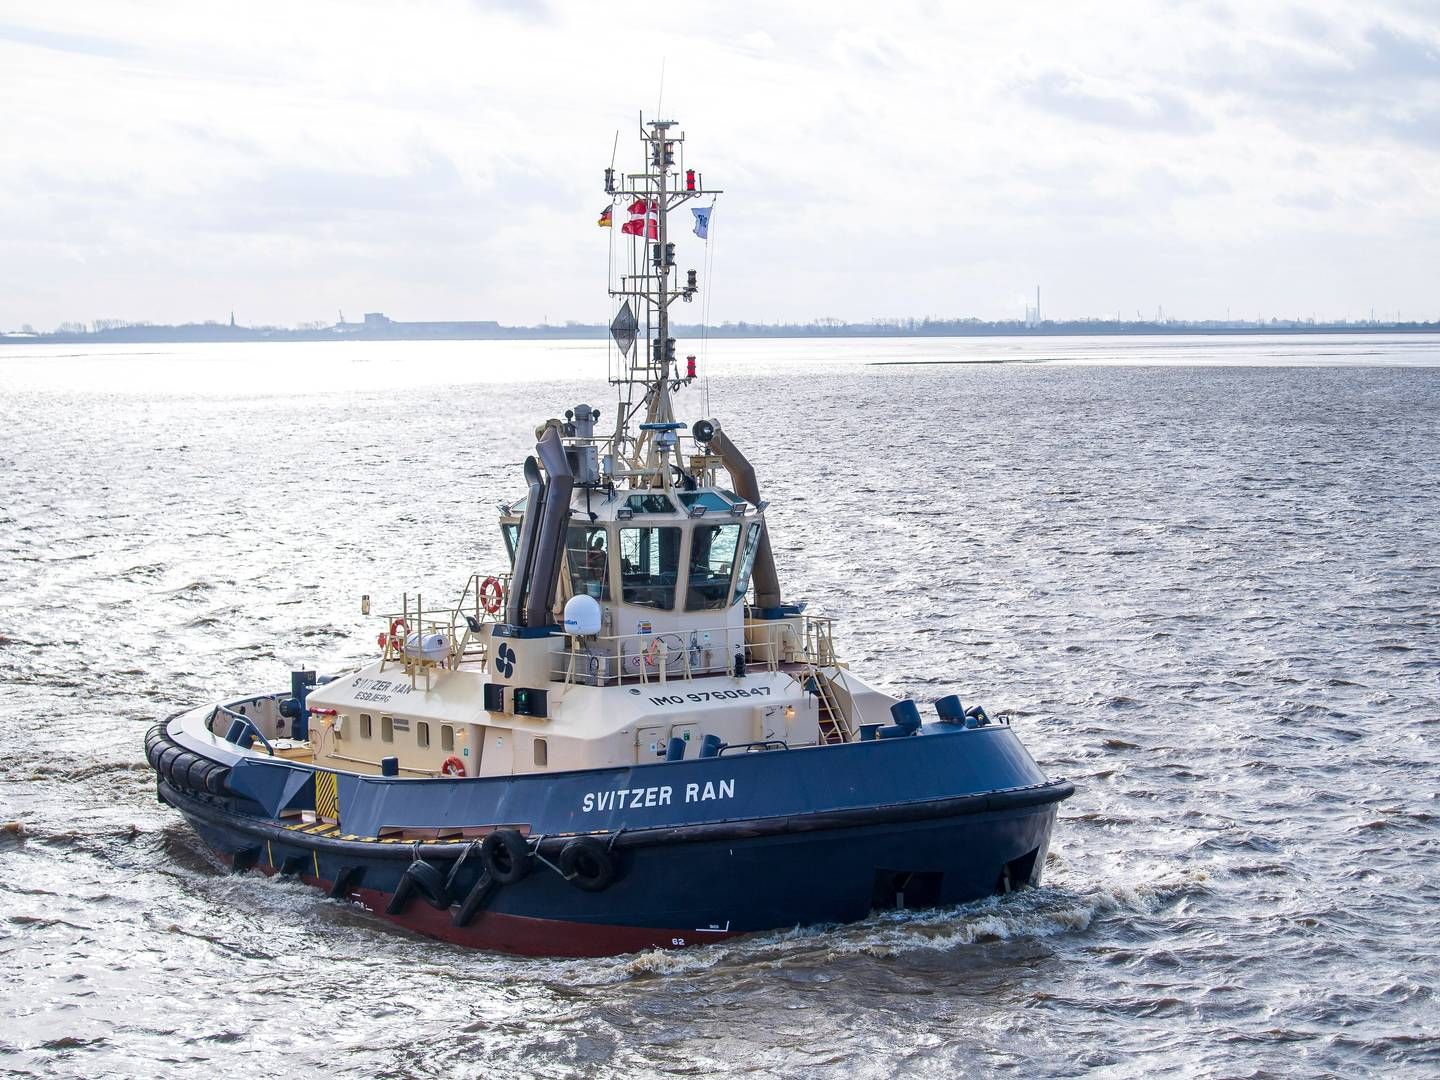 Svitzer has a fleet of 456 tugs, operates in 37 countries, has agreements in 140 ports and with 40 port terminals worldwide. The company employs around 4,000 people. | Photo: Sina Schuldt/AP/Ritzau Scanpix